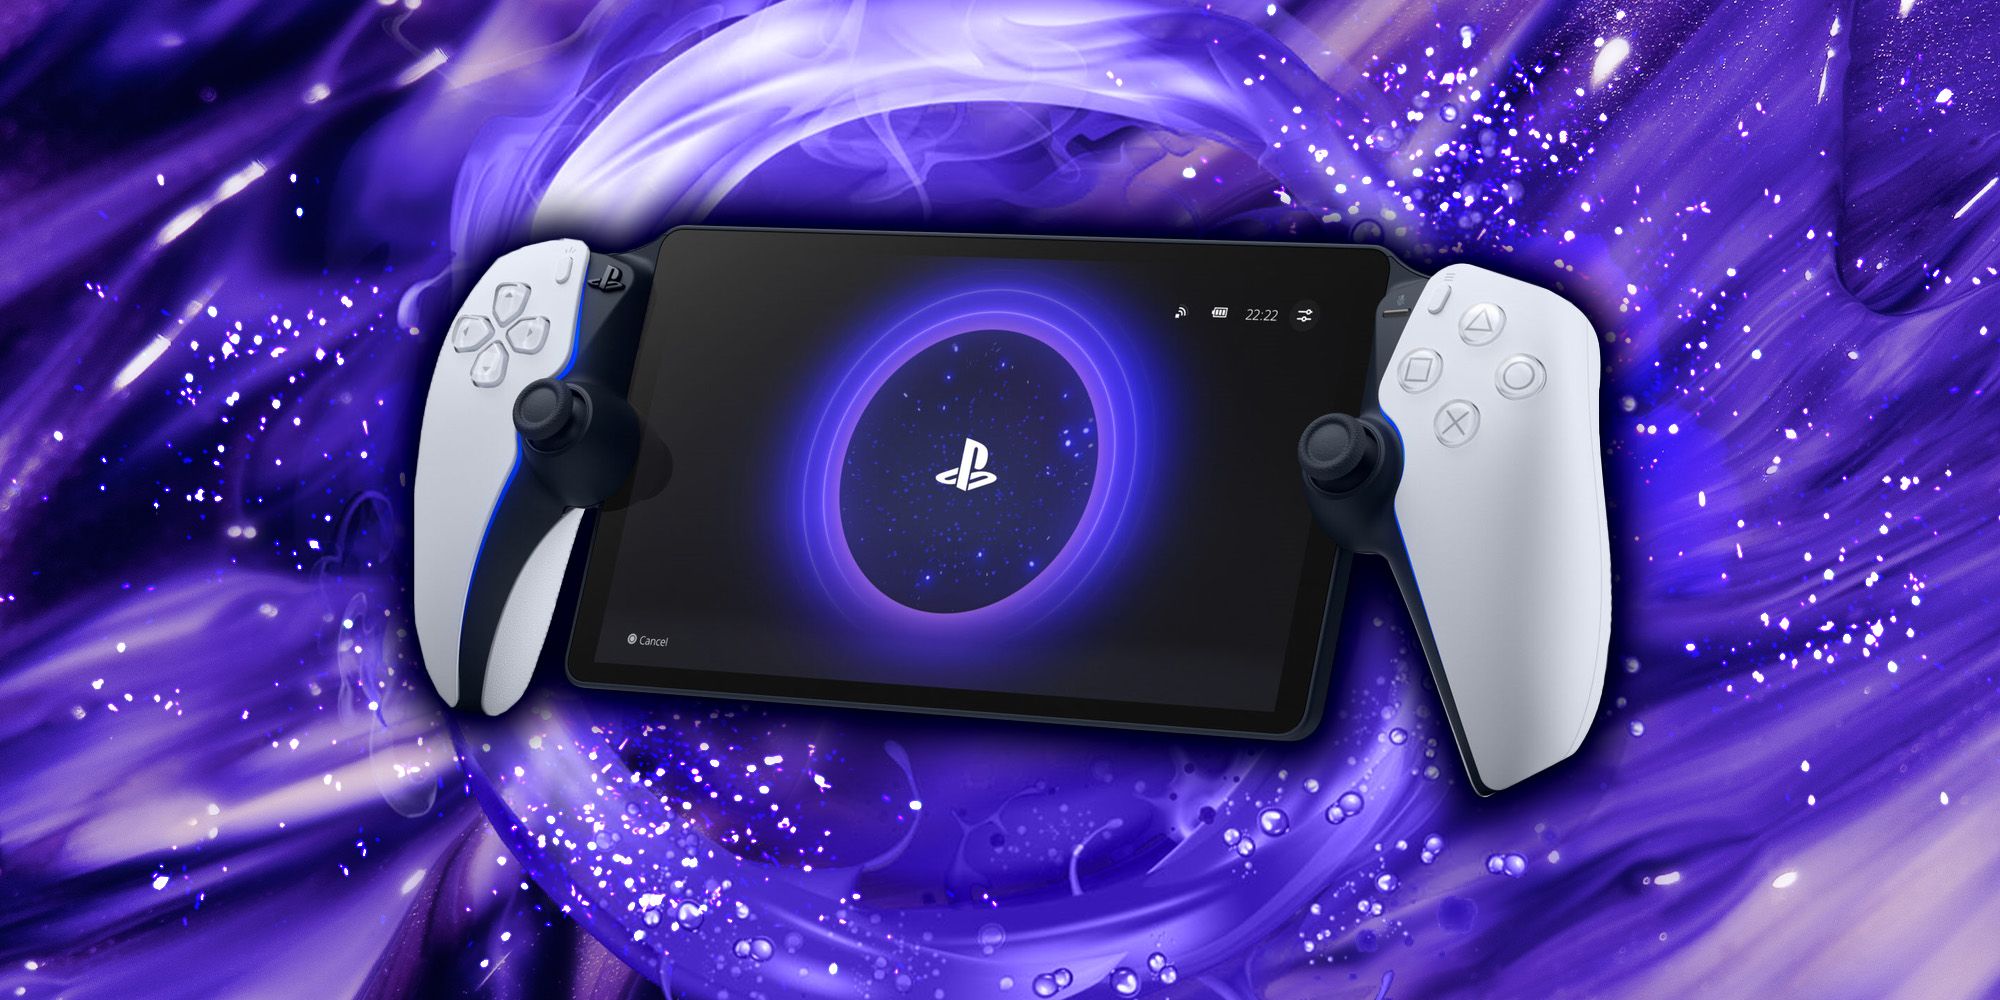 A photo of the PlayStation Portal, a handheld gaming device consisting of a screen between two halves of a controller, over a swirly purple backdrop depicting a portal-like vortex.